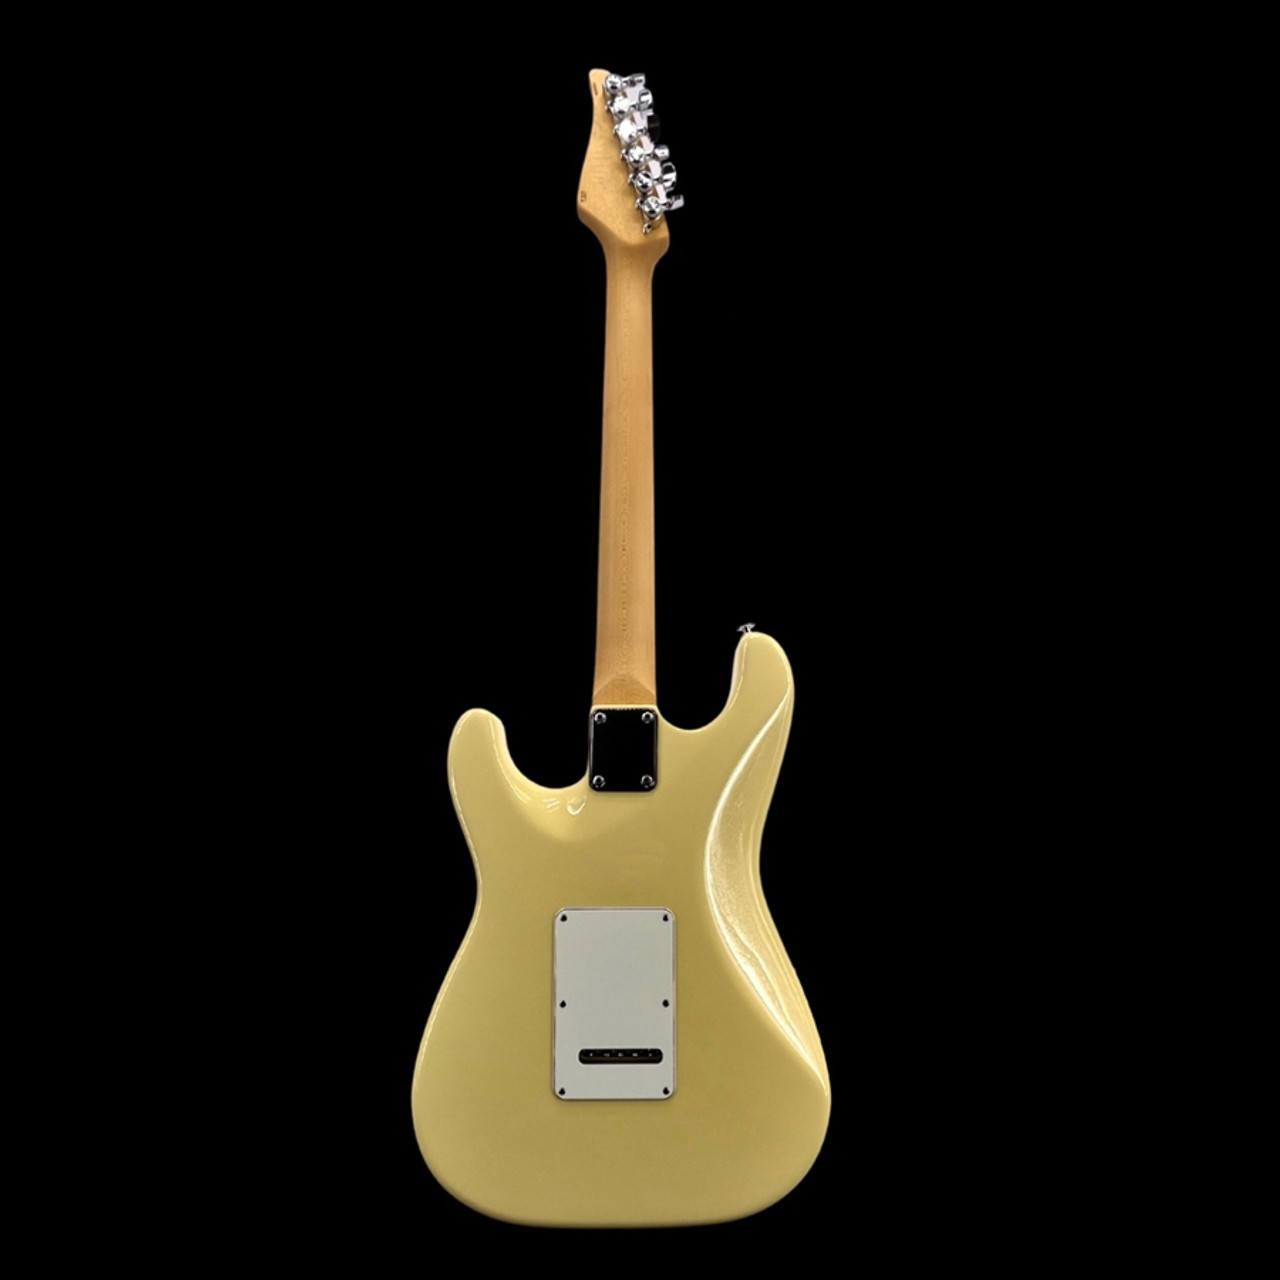 Suhr Classic S in Vintage Yellow with SSS Pickup Configuration and Maple Fretboard